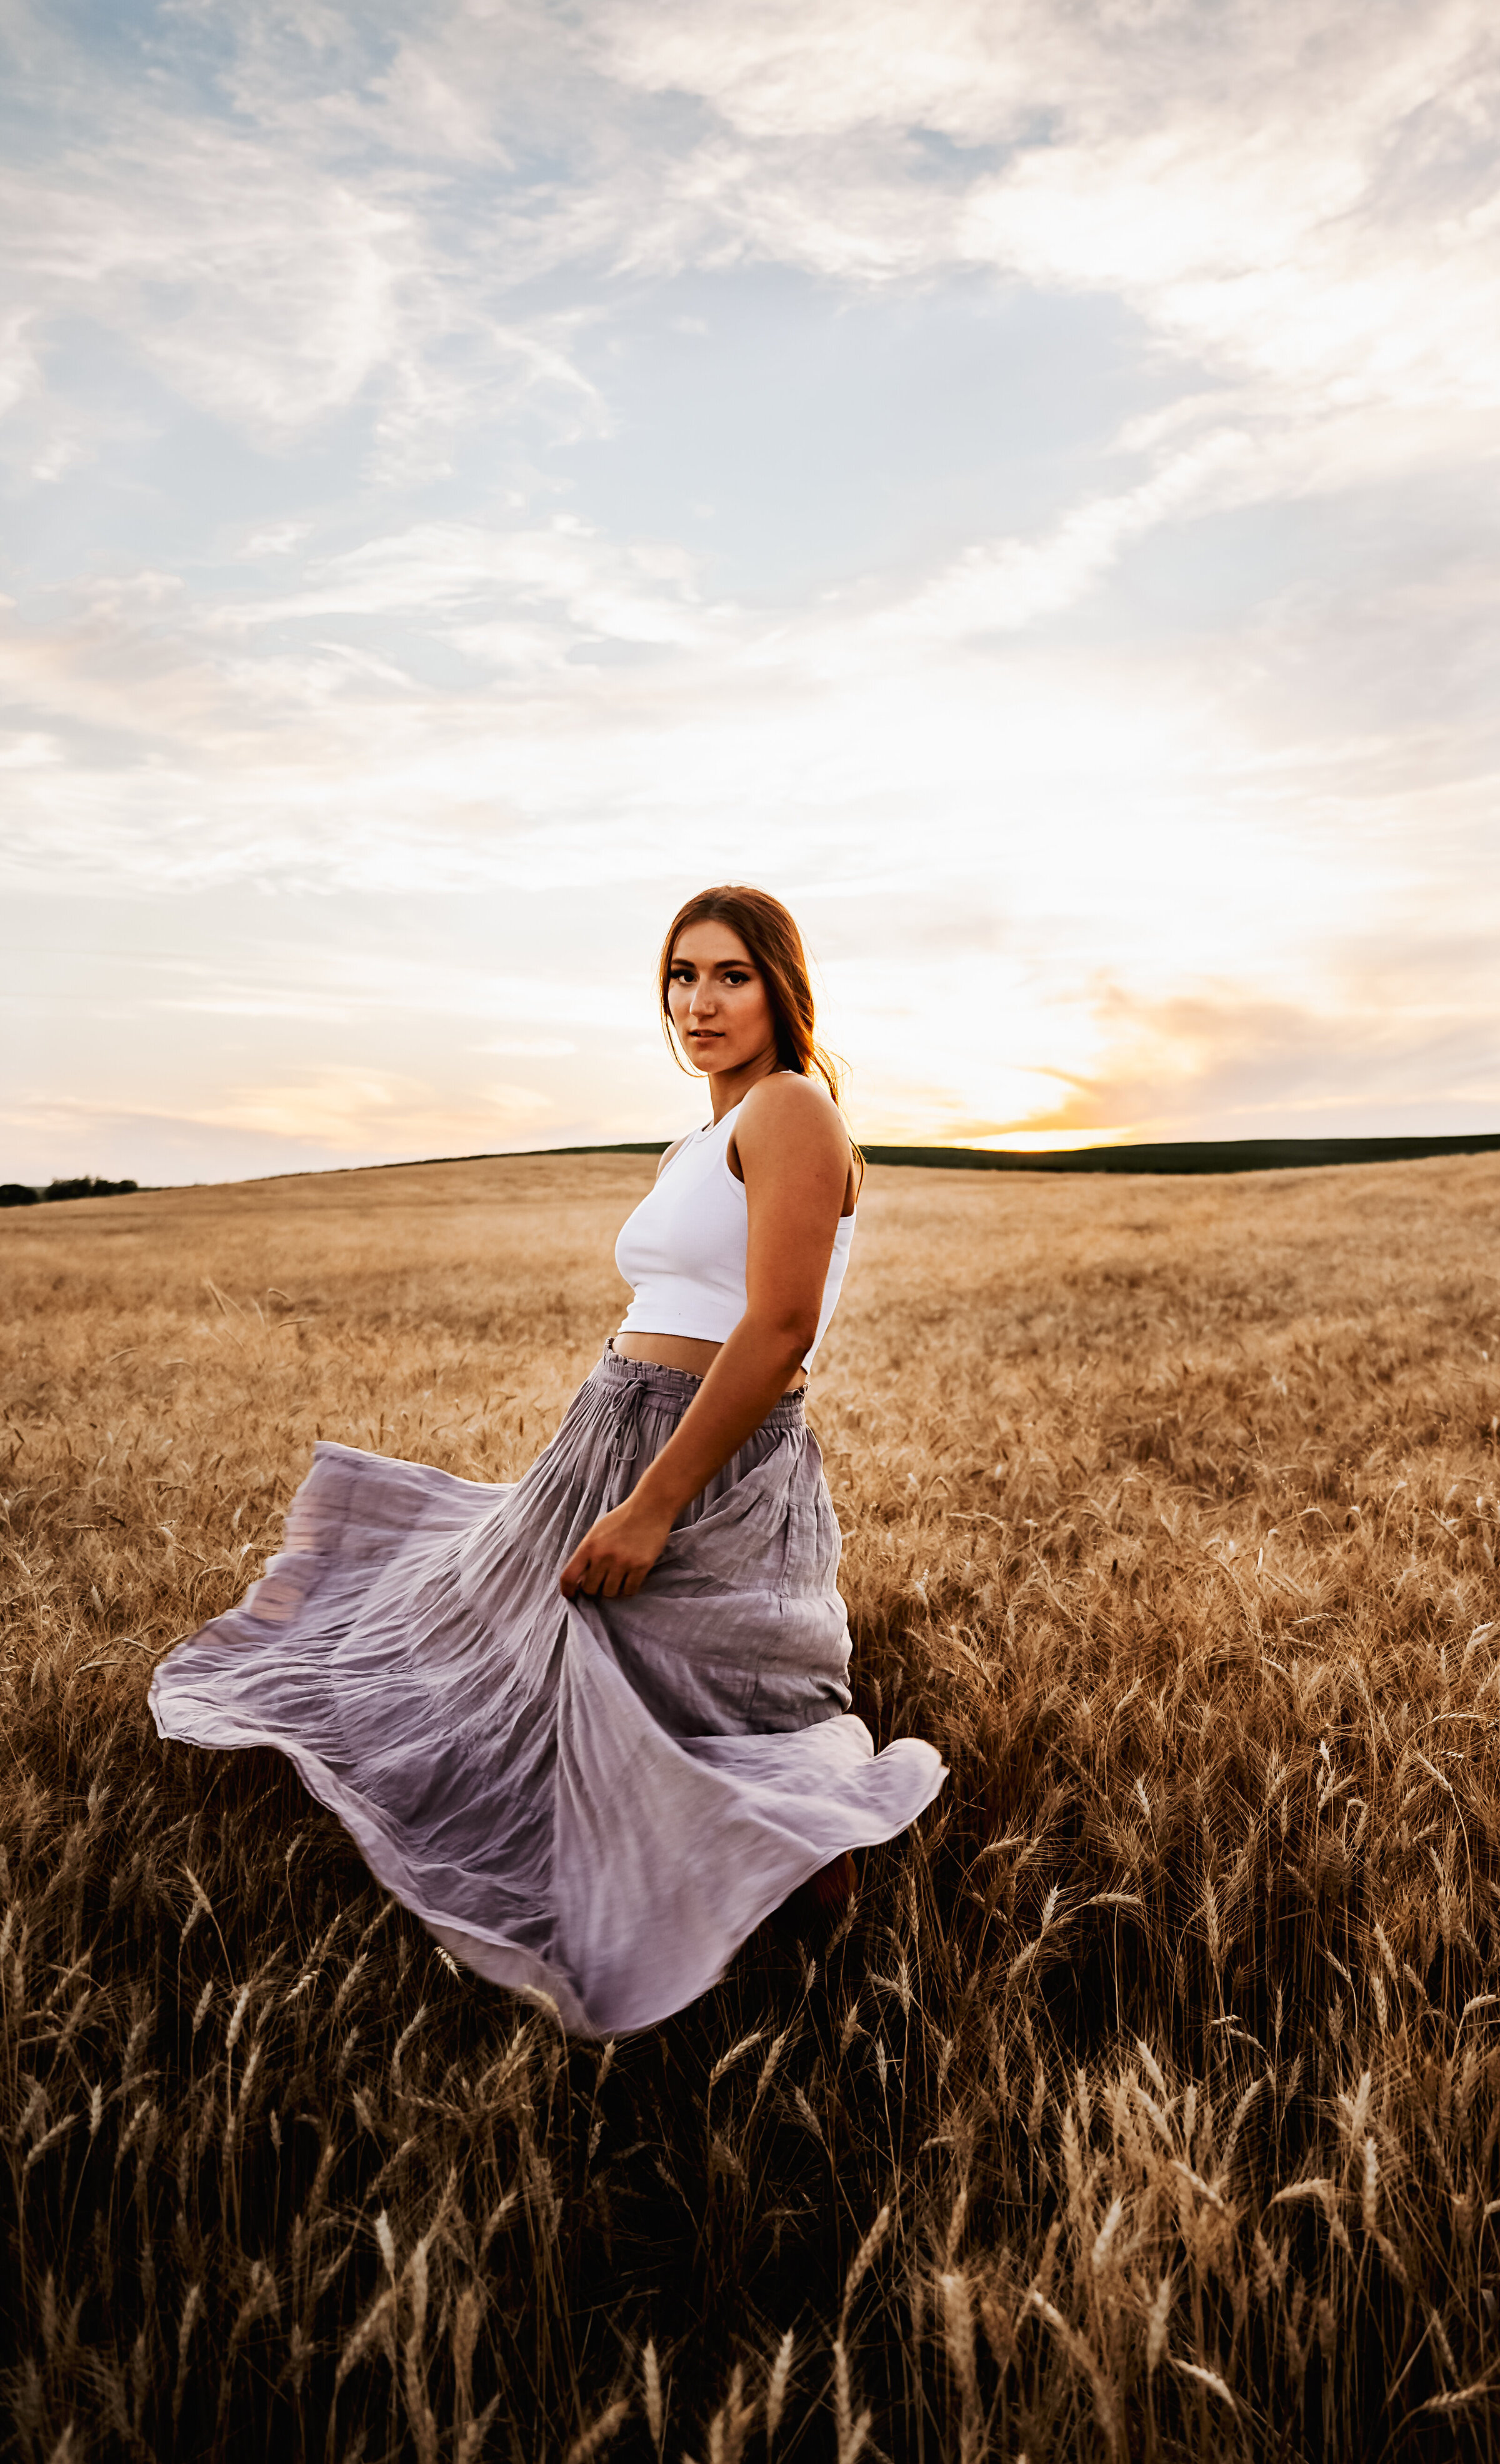 Girl twirls her skirt in golden wheat field with rolling hills at sunset